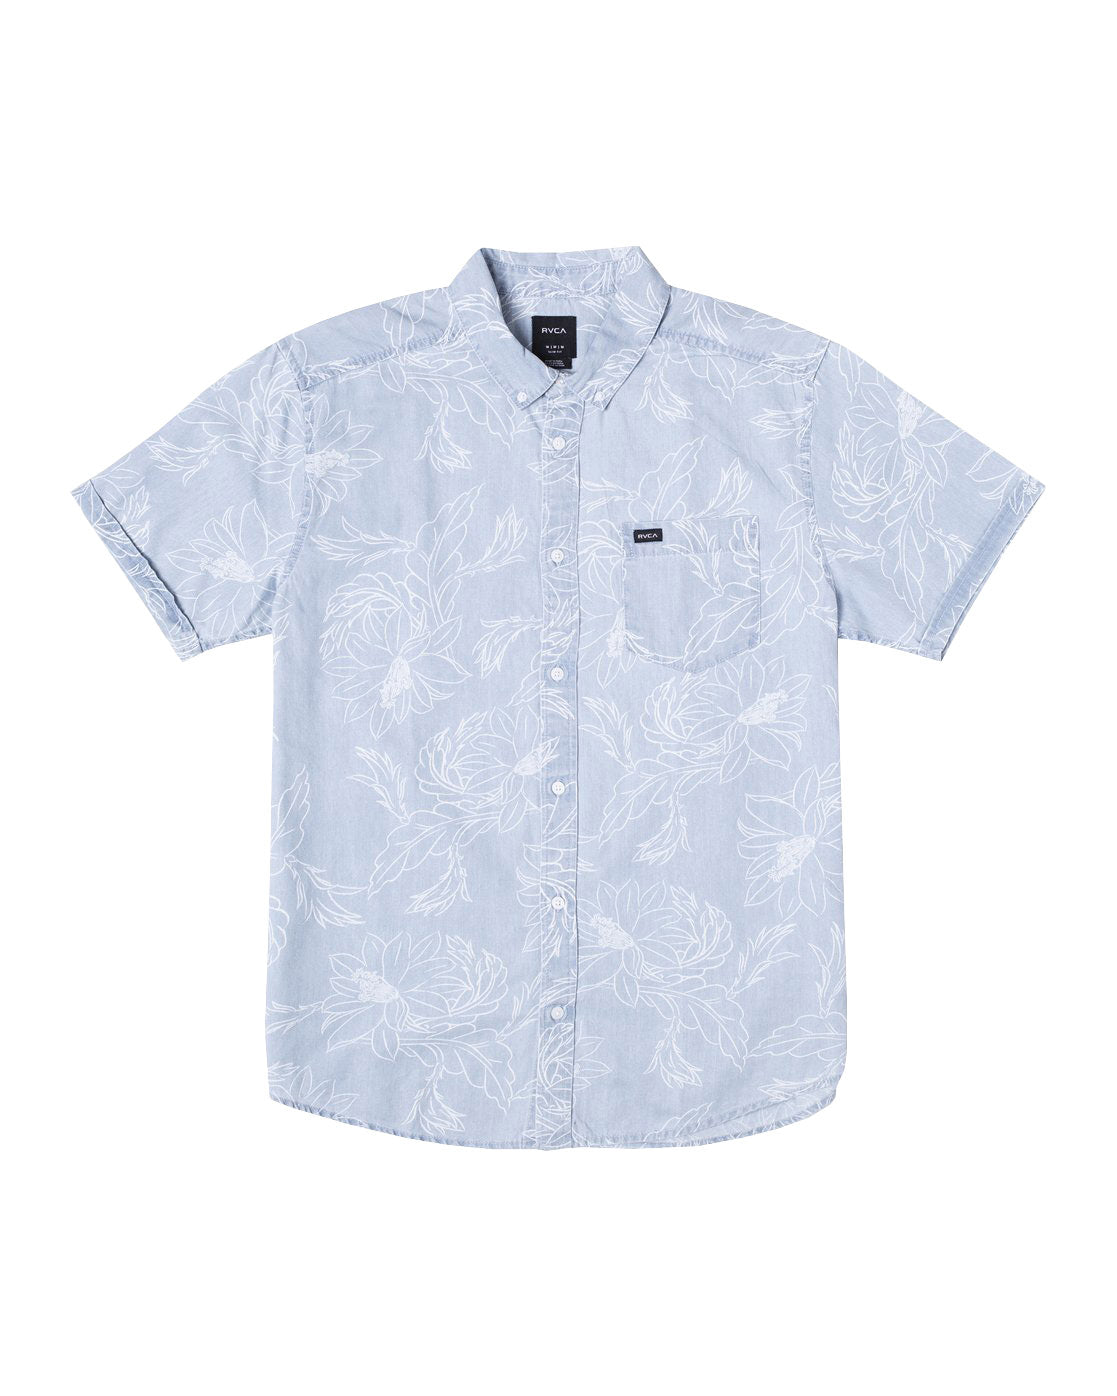 RVCA Hastings Floral SS Shirt